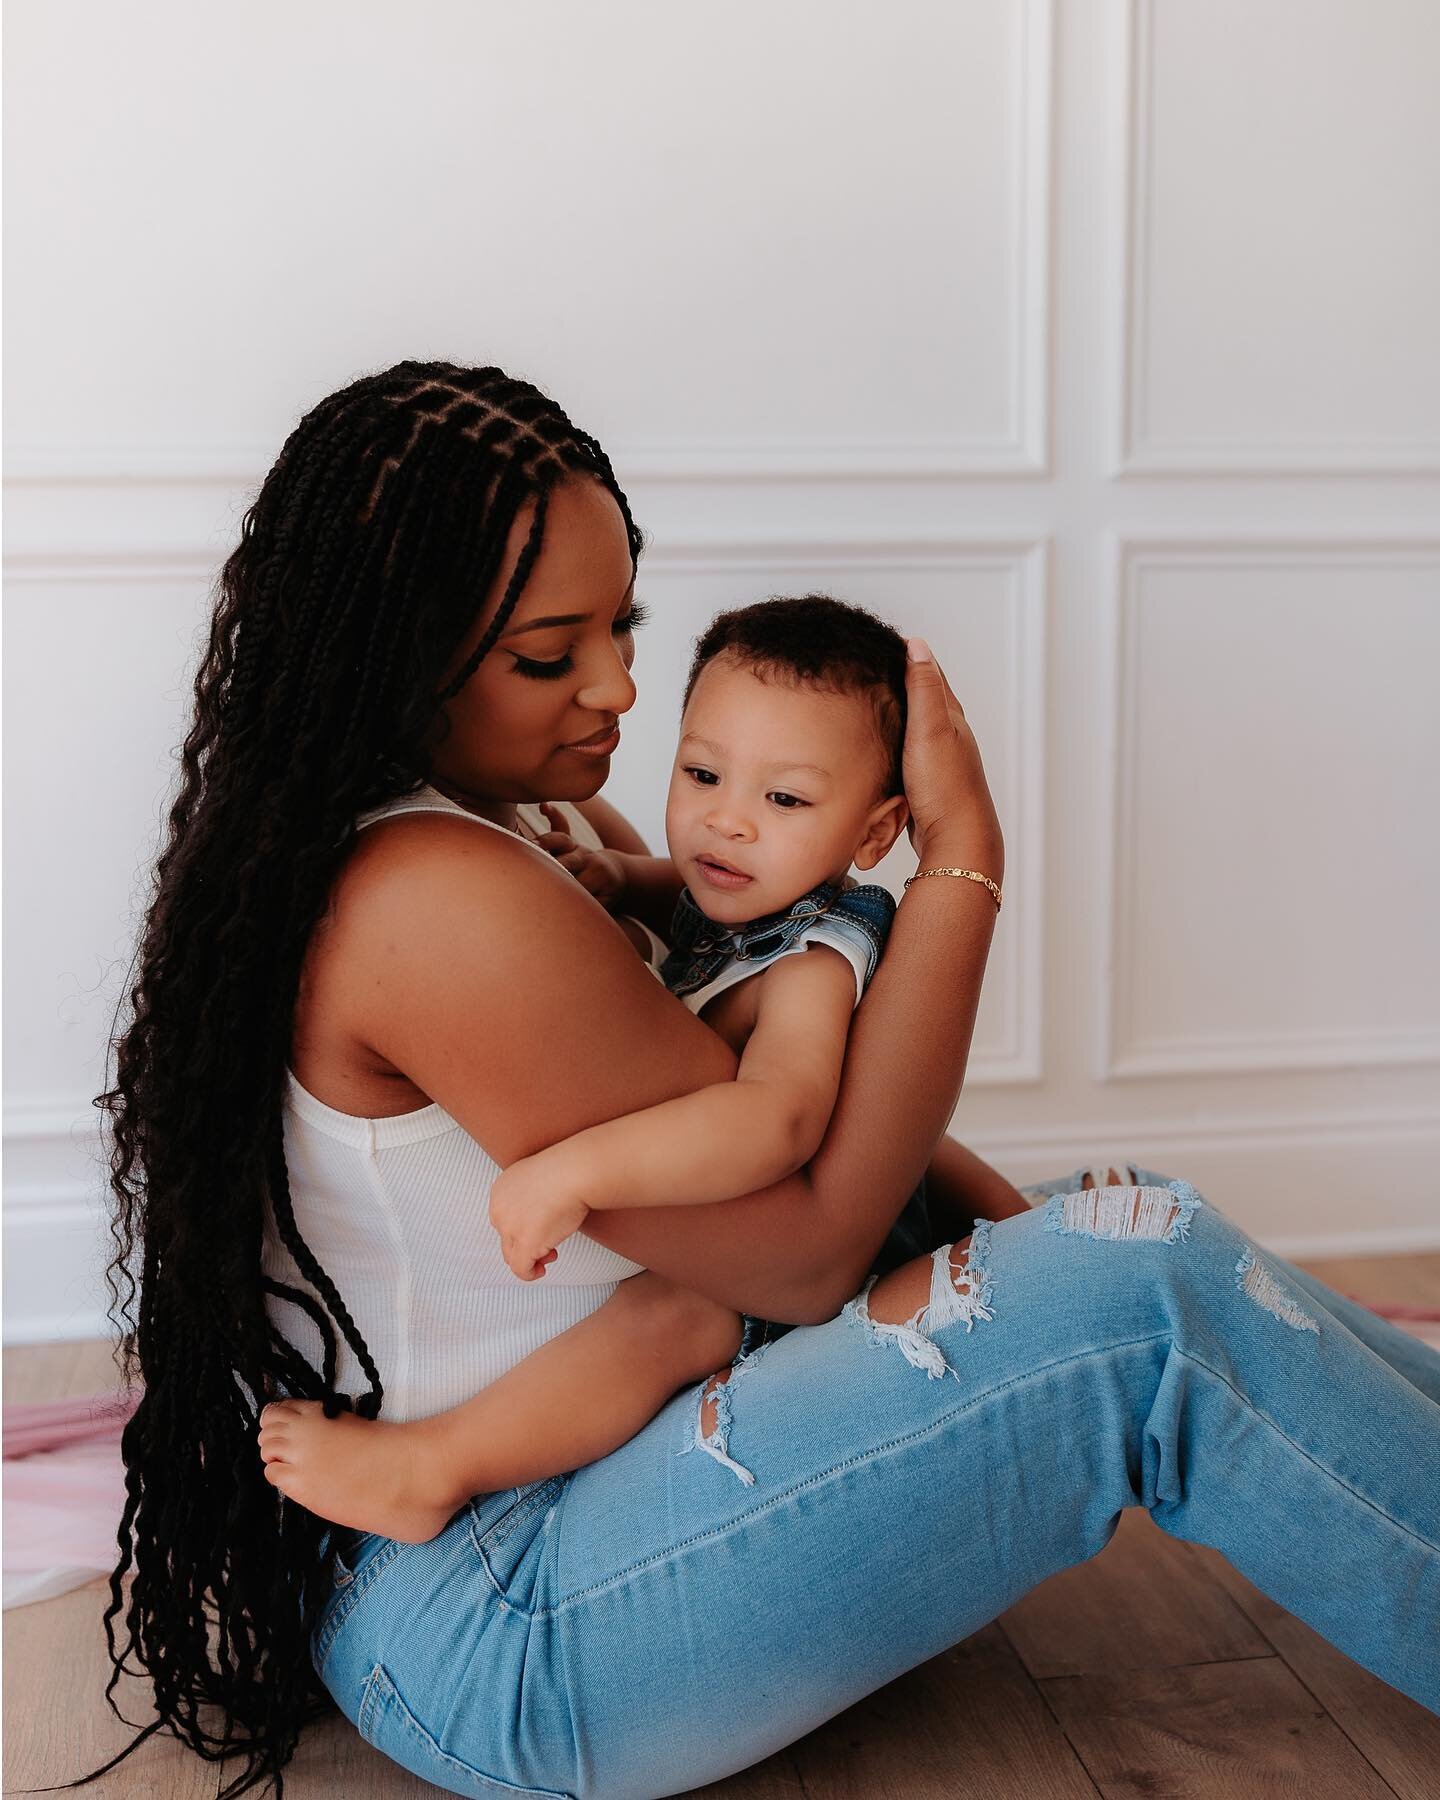 I&rsquo;ve met so many beautiful mamas this season, I&rsquo;m forever grateful you chose me to capture these sweet still moments for you and your babies 🤍

#dfwphotographer #dfwmaternityphotographer #dfwmotherhoodphotographer #dfwmommyandme #mommyan